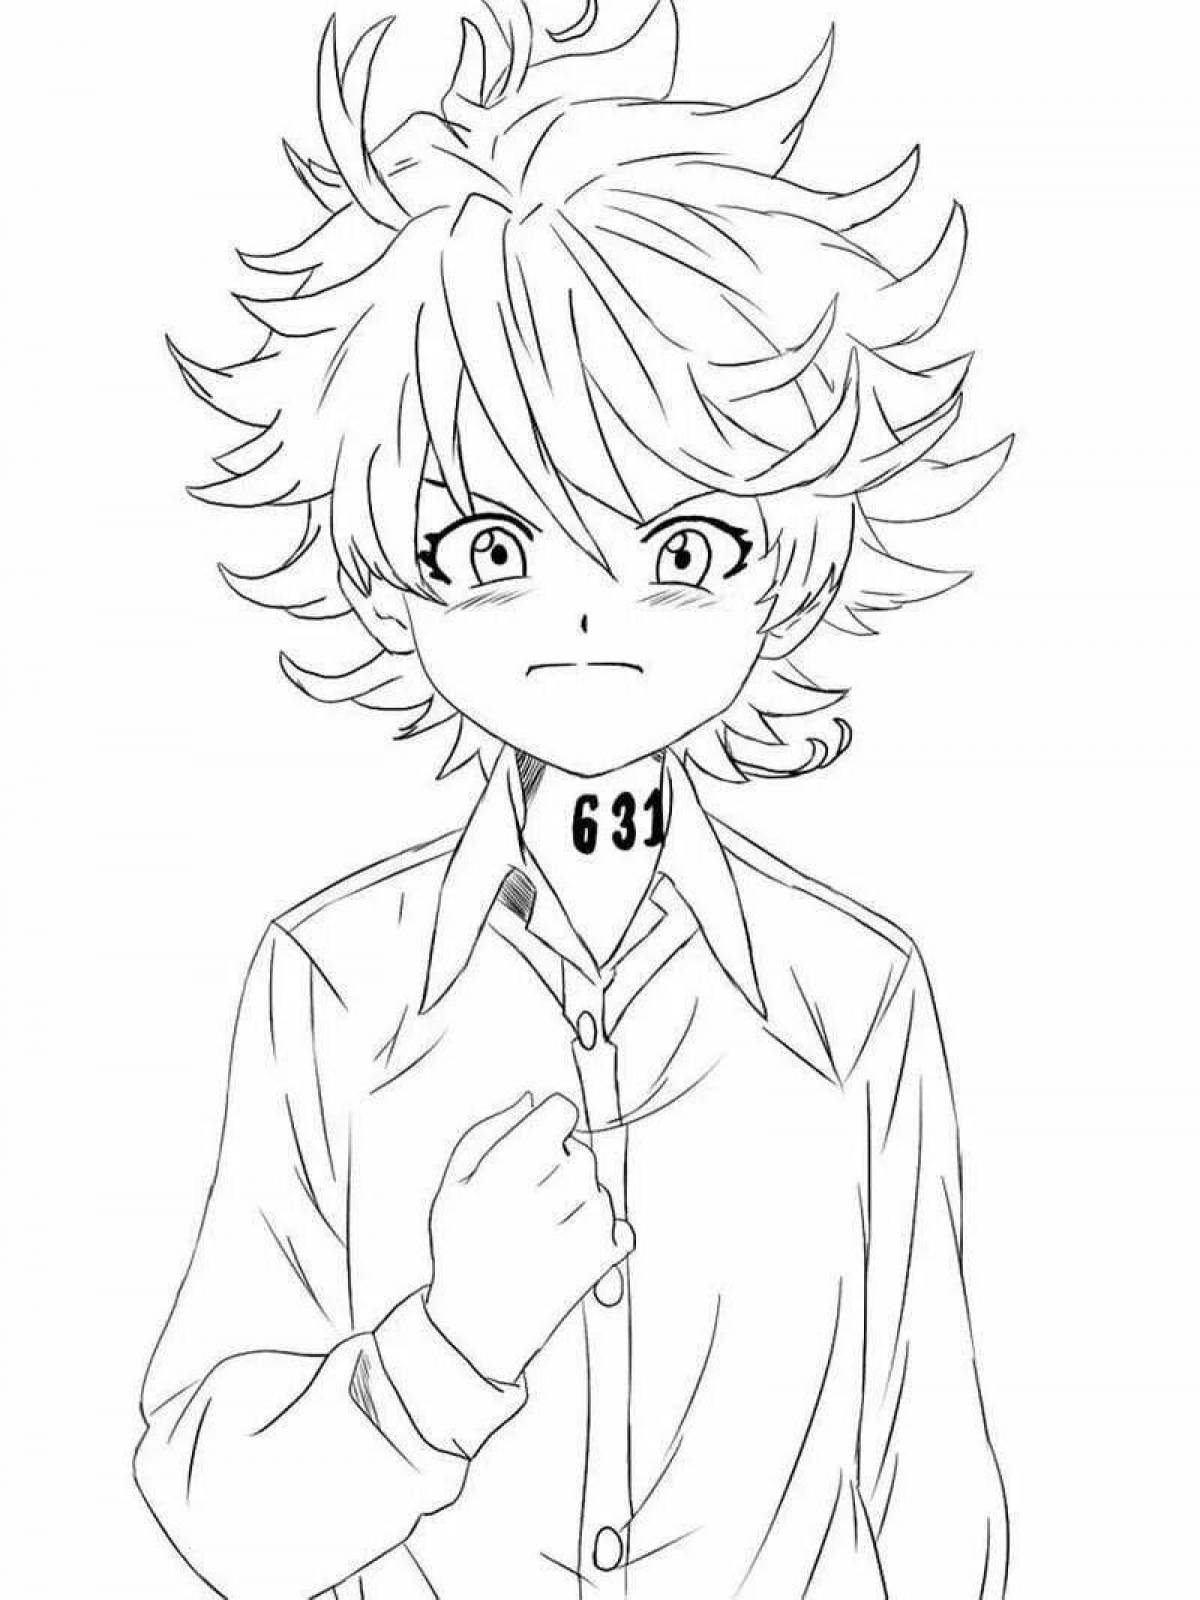 Amazing The Promised Neverland Anime Coloring Page